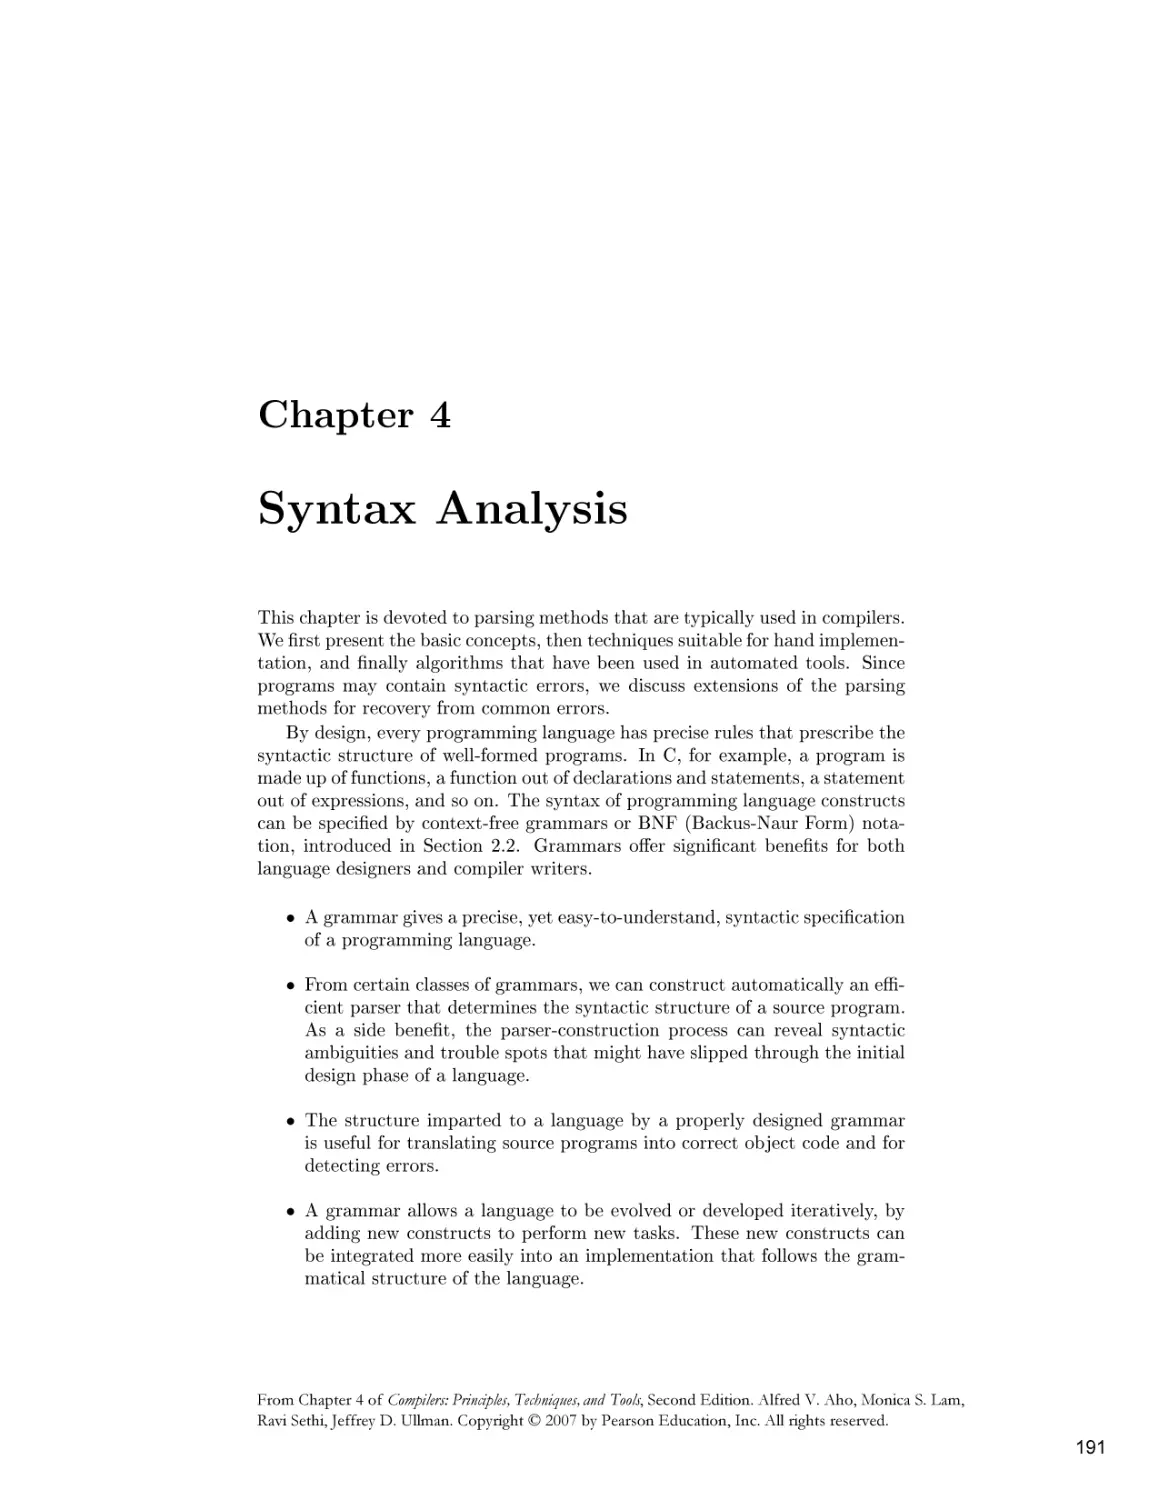 Chapter 4. Syntax Analysis